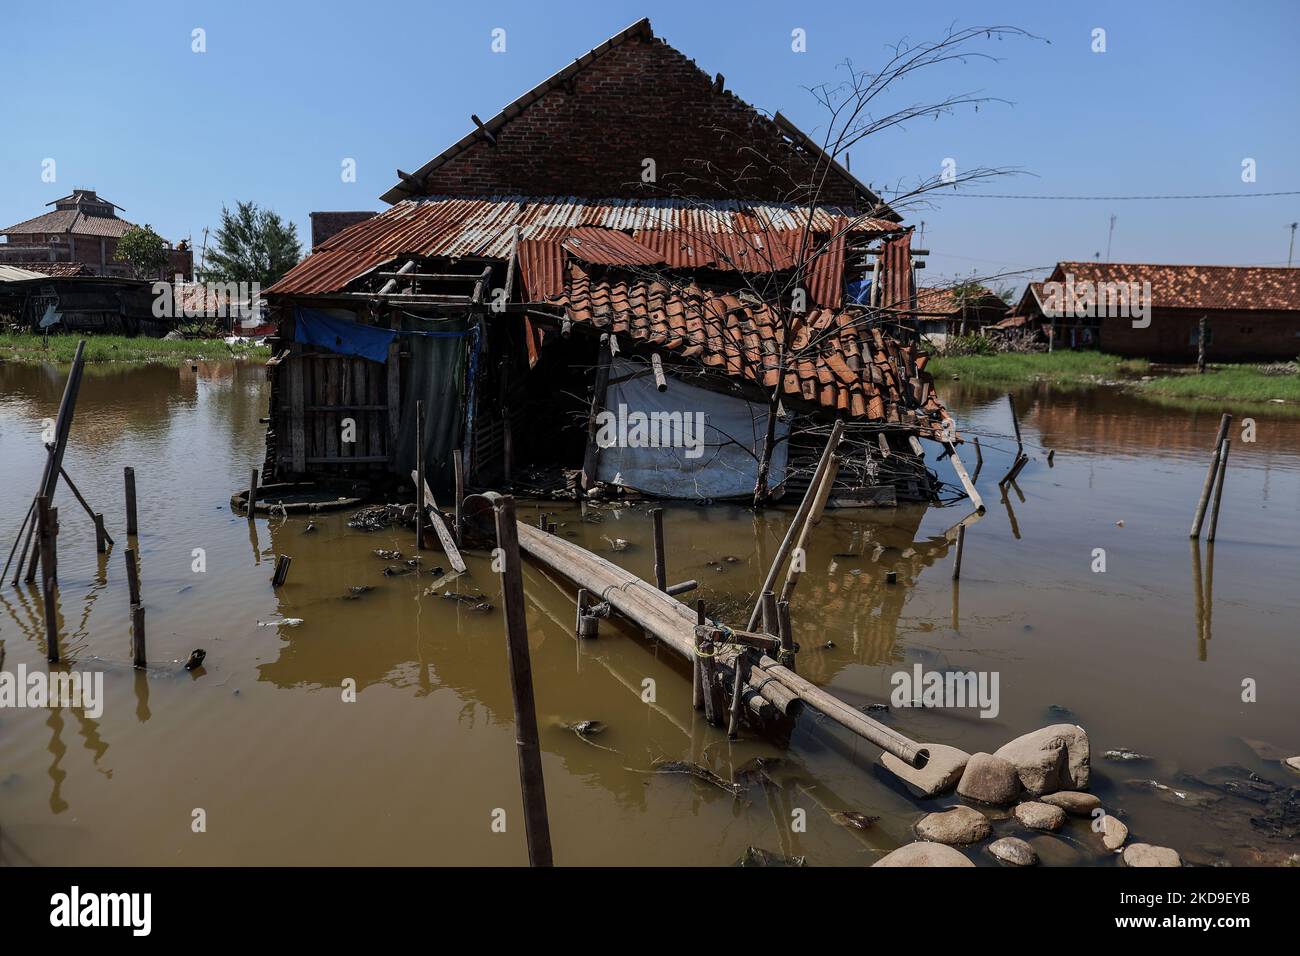 A home surrounded by rising sea levels is seen at low-lying Jeruk Sari neighborhood in coastal Pekalongan, Central Java, Indonesia, June 5, 2021. An area in which almost every available space is used for batik production, with a high level of poverty, vulnerable to both rising sea levels and high river peak flows. They hangs and washes at a polluted river for process traditional Javanese textile called Batik. Batik is a traditional Indonesian method of using wax to resist water-based dyes to depict patterns and drawings on fabric. At the heart of the problem is Pekalongan’s overreliance on gro Stock Photo